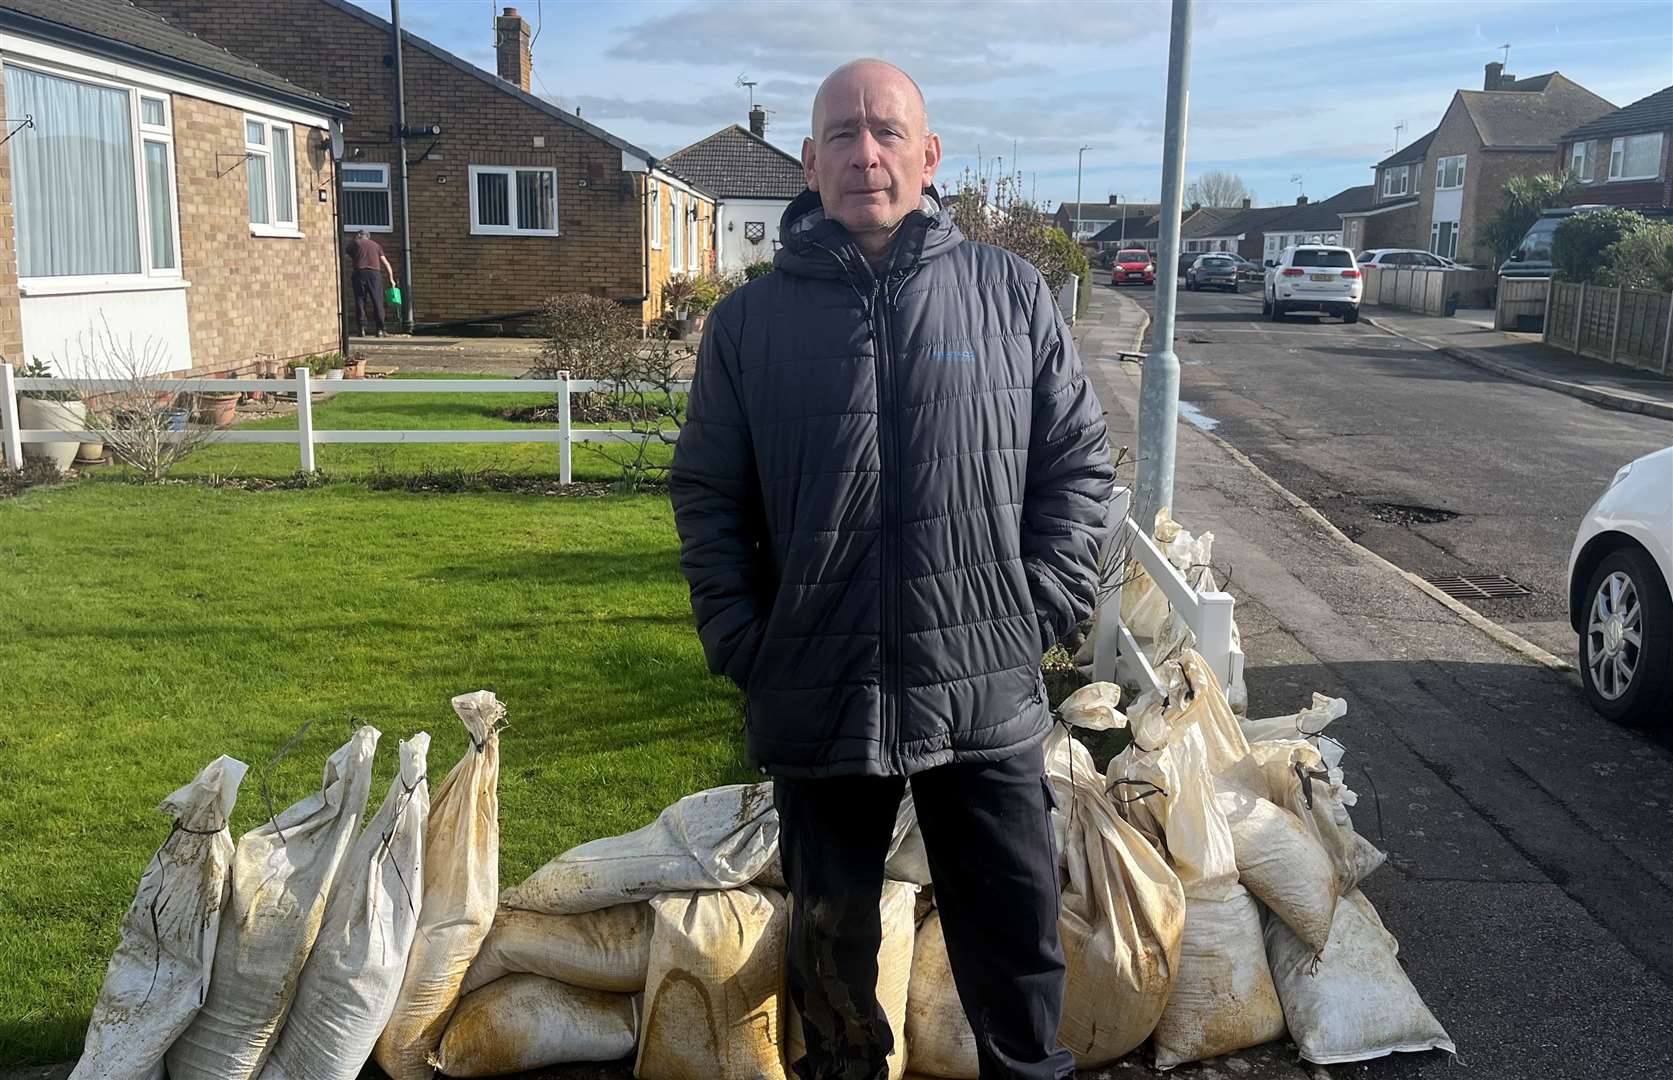 Marlon Harman, 59, with the sandbags he received from Folkestone and Hythe District Council